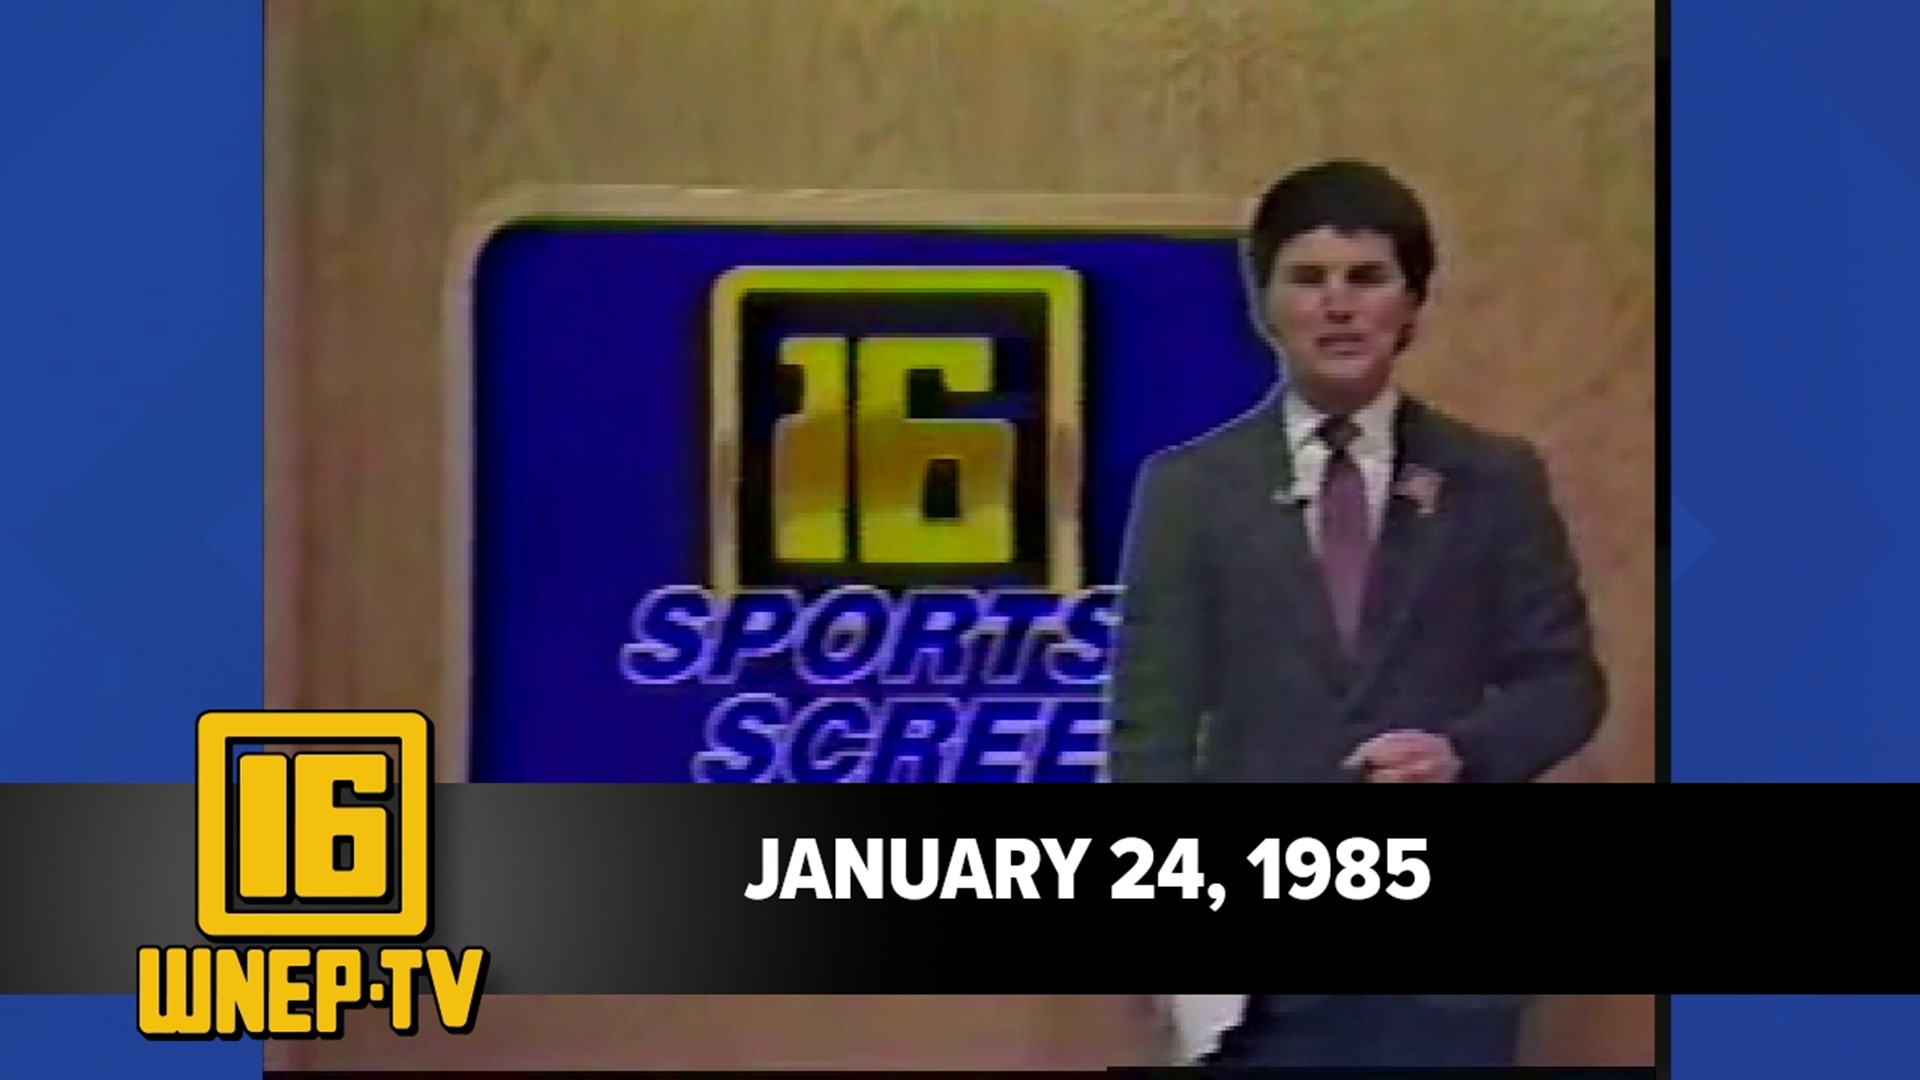 Join Karen Harch and Nolan Johannes with curated stories from January 24, 1985.